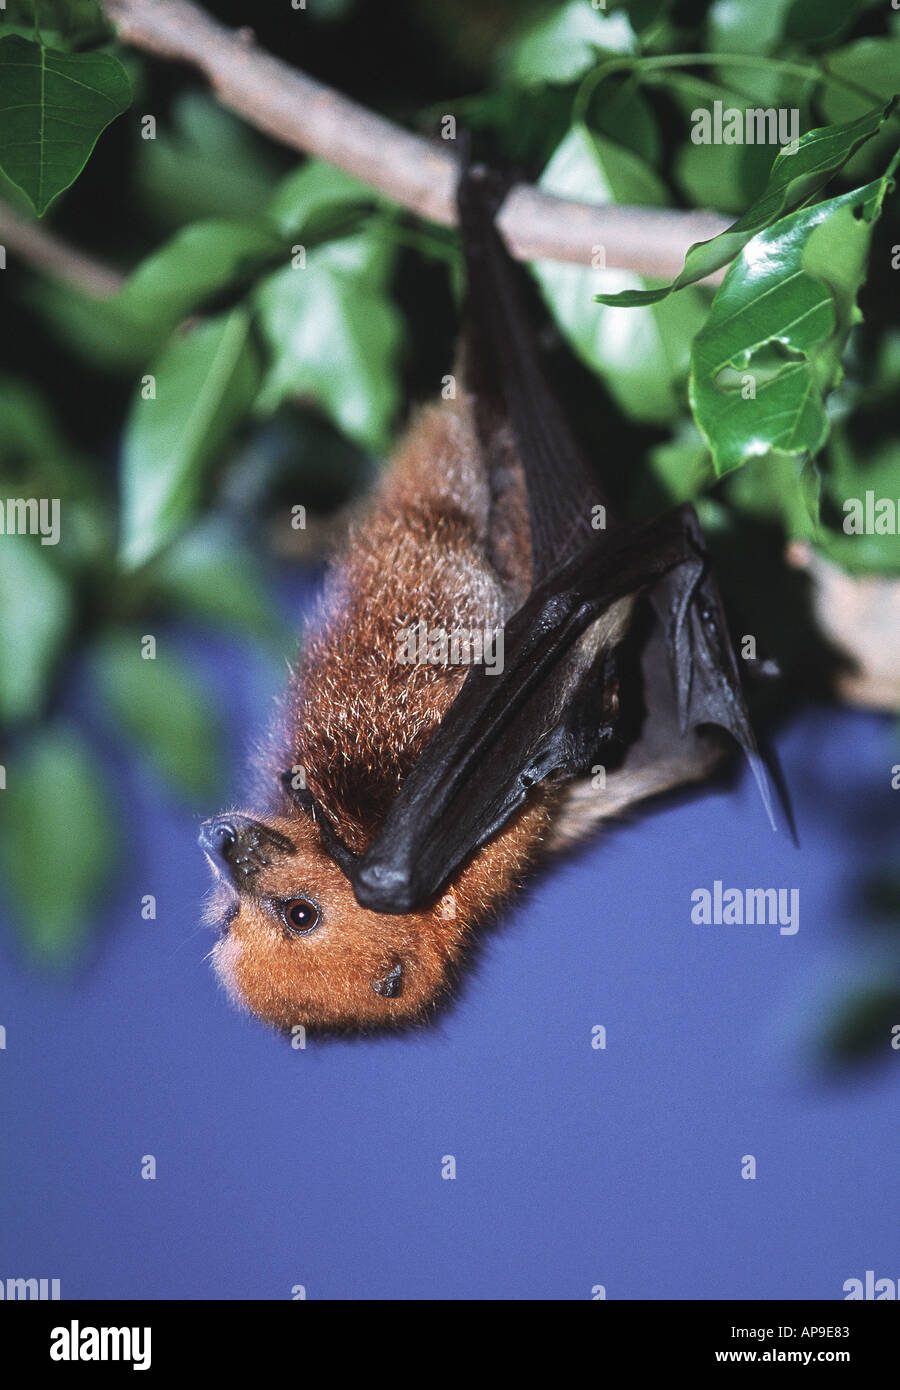 close up of fruit bat hanging on a branch Stock Photo